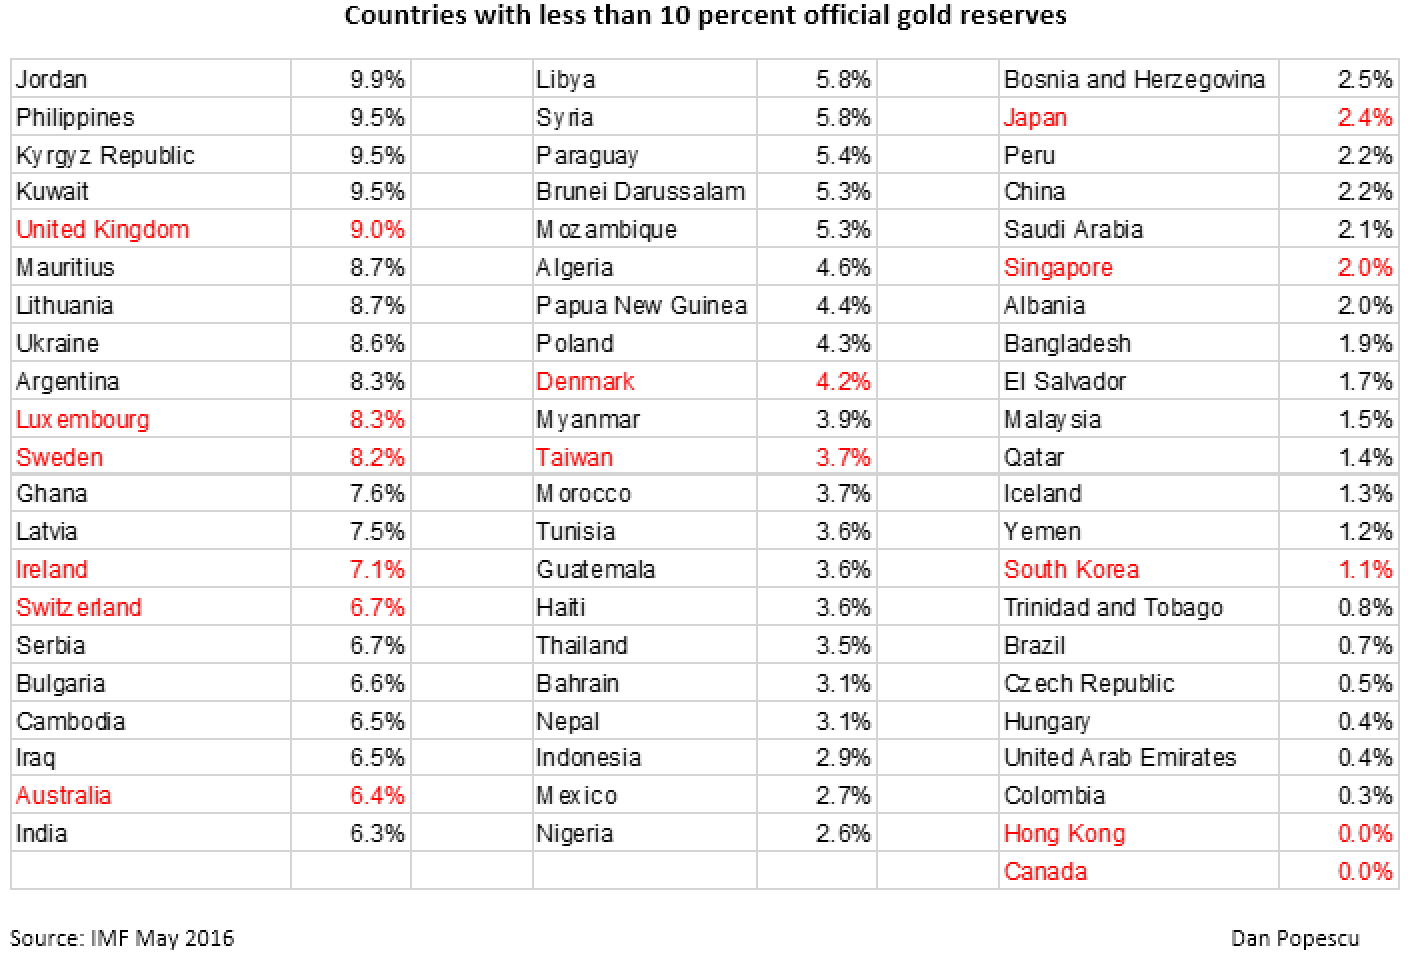 Countries with less than 10 percent official gold reserves